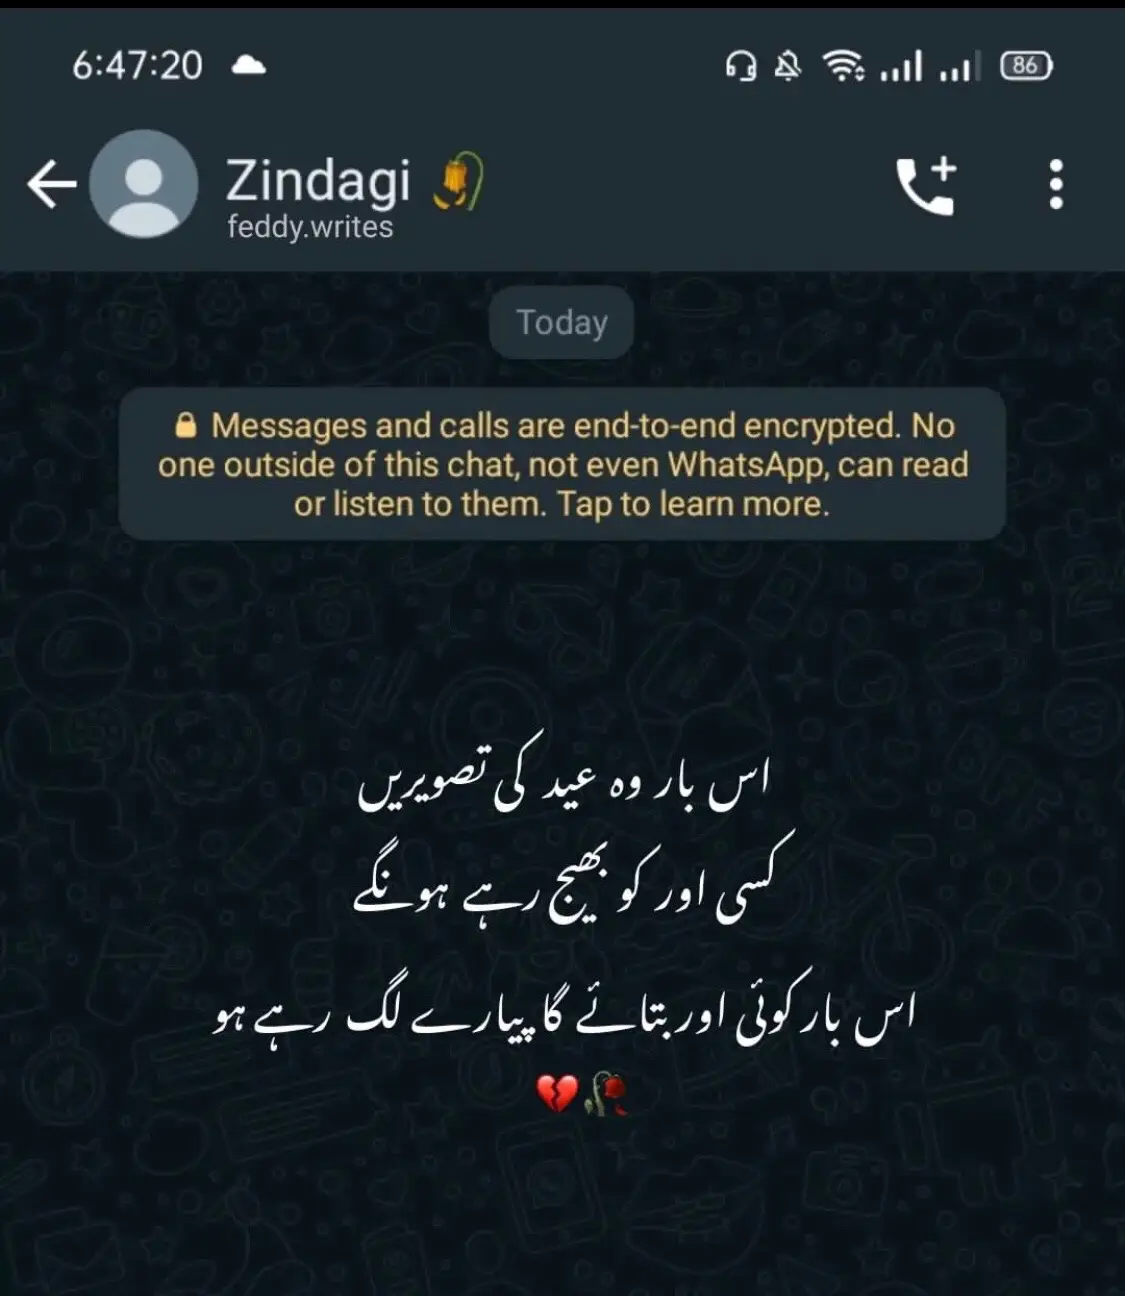 Konsi achi hai comment mn btayn sb?🙂💔#foryou #support #foryoupage #viral #heartbroken #sadpoetry #alitypiest 